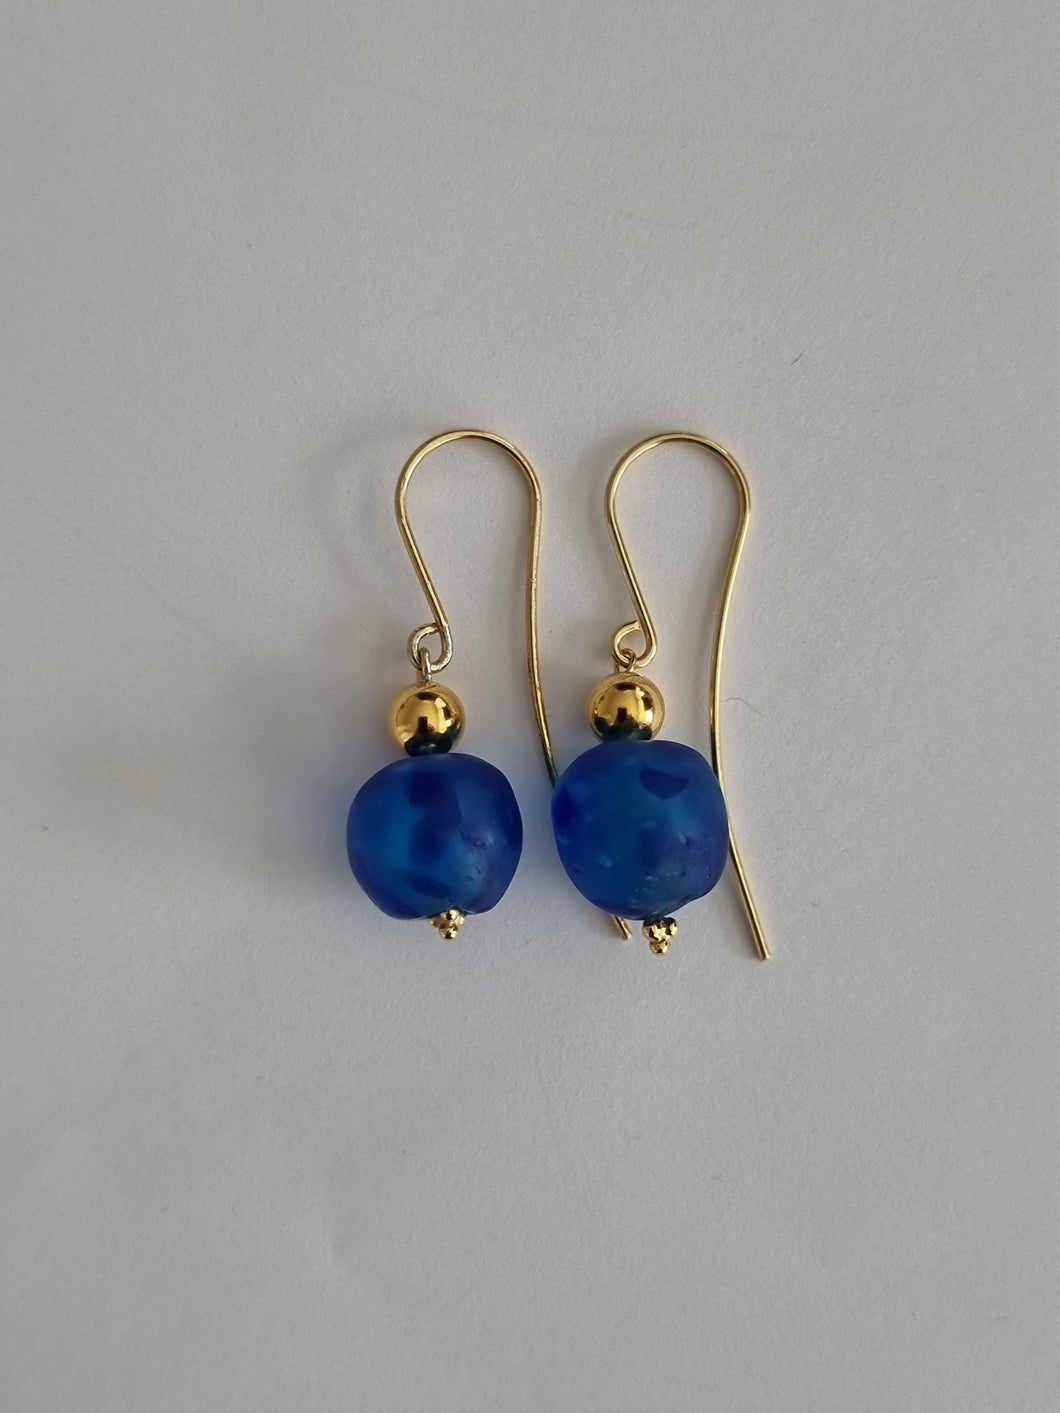 Gold plated earrings. Recycled glass beads from Ghana.